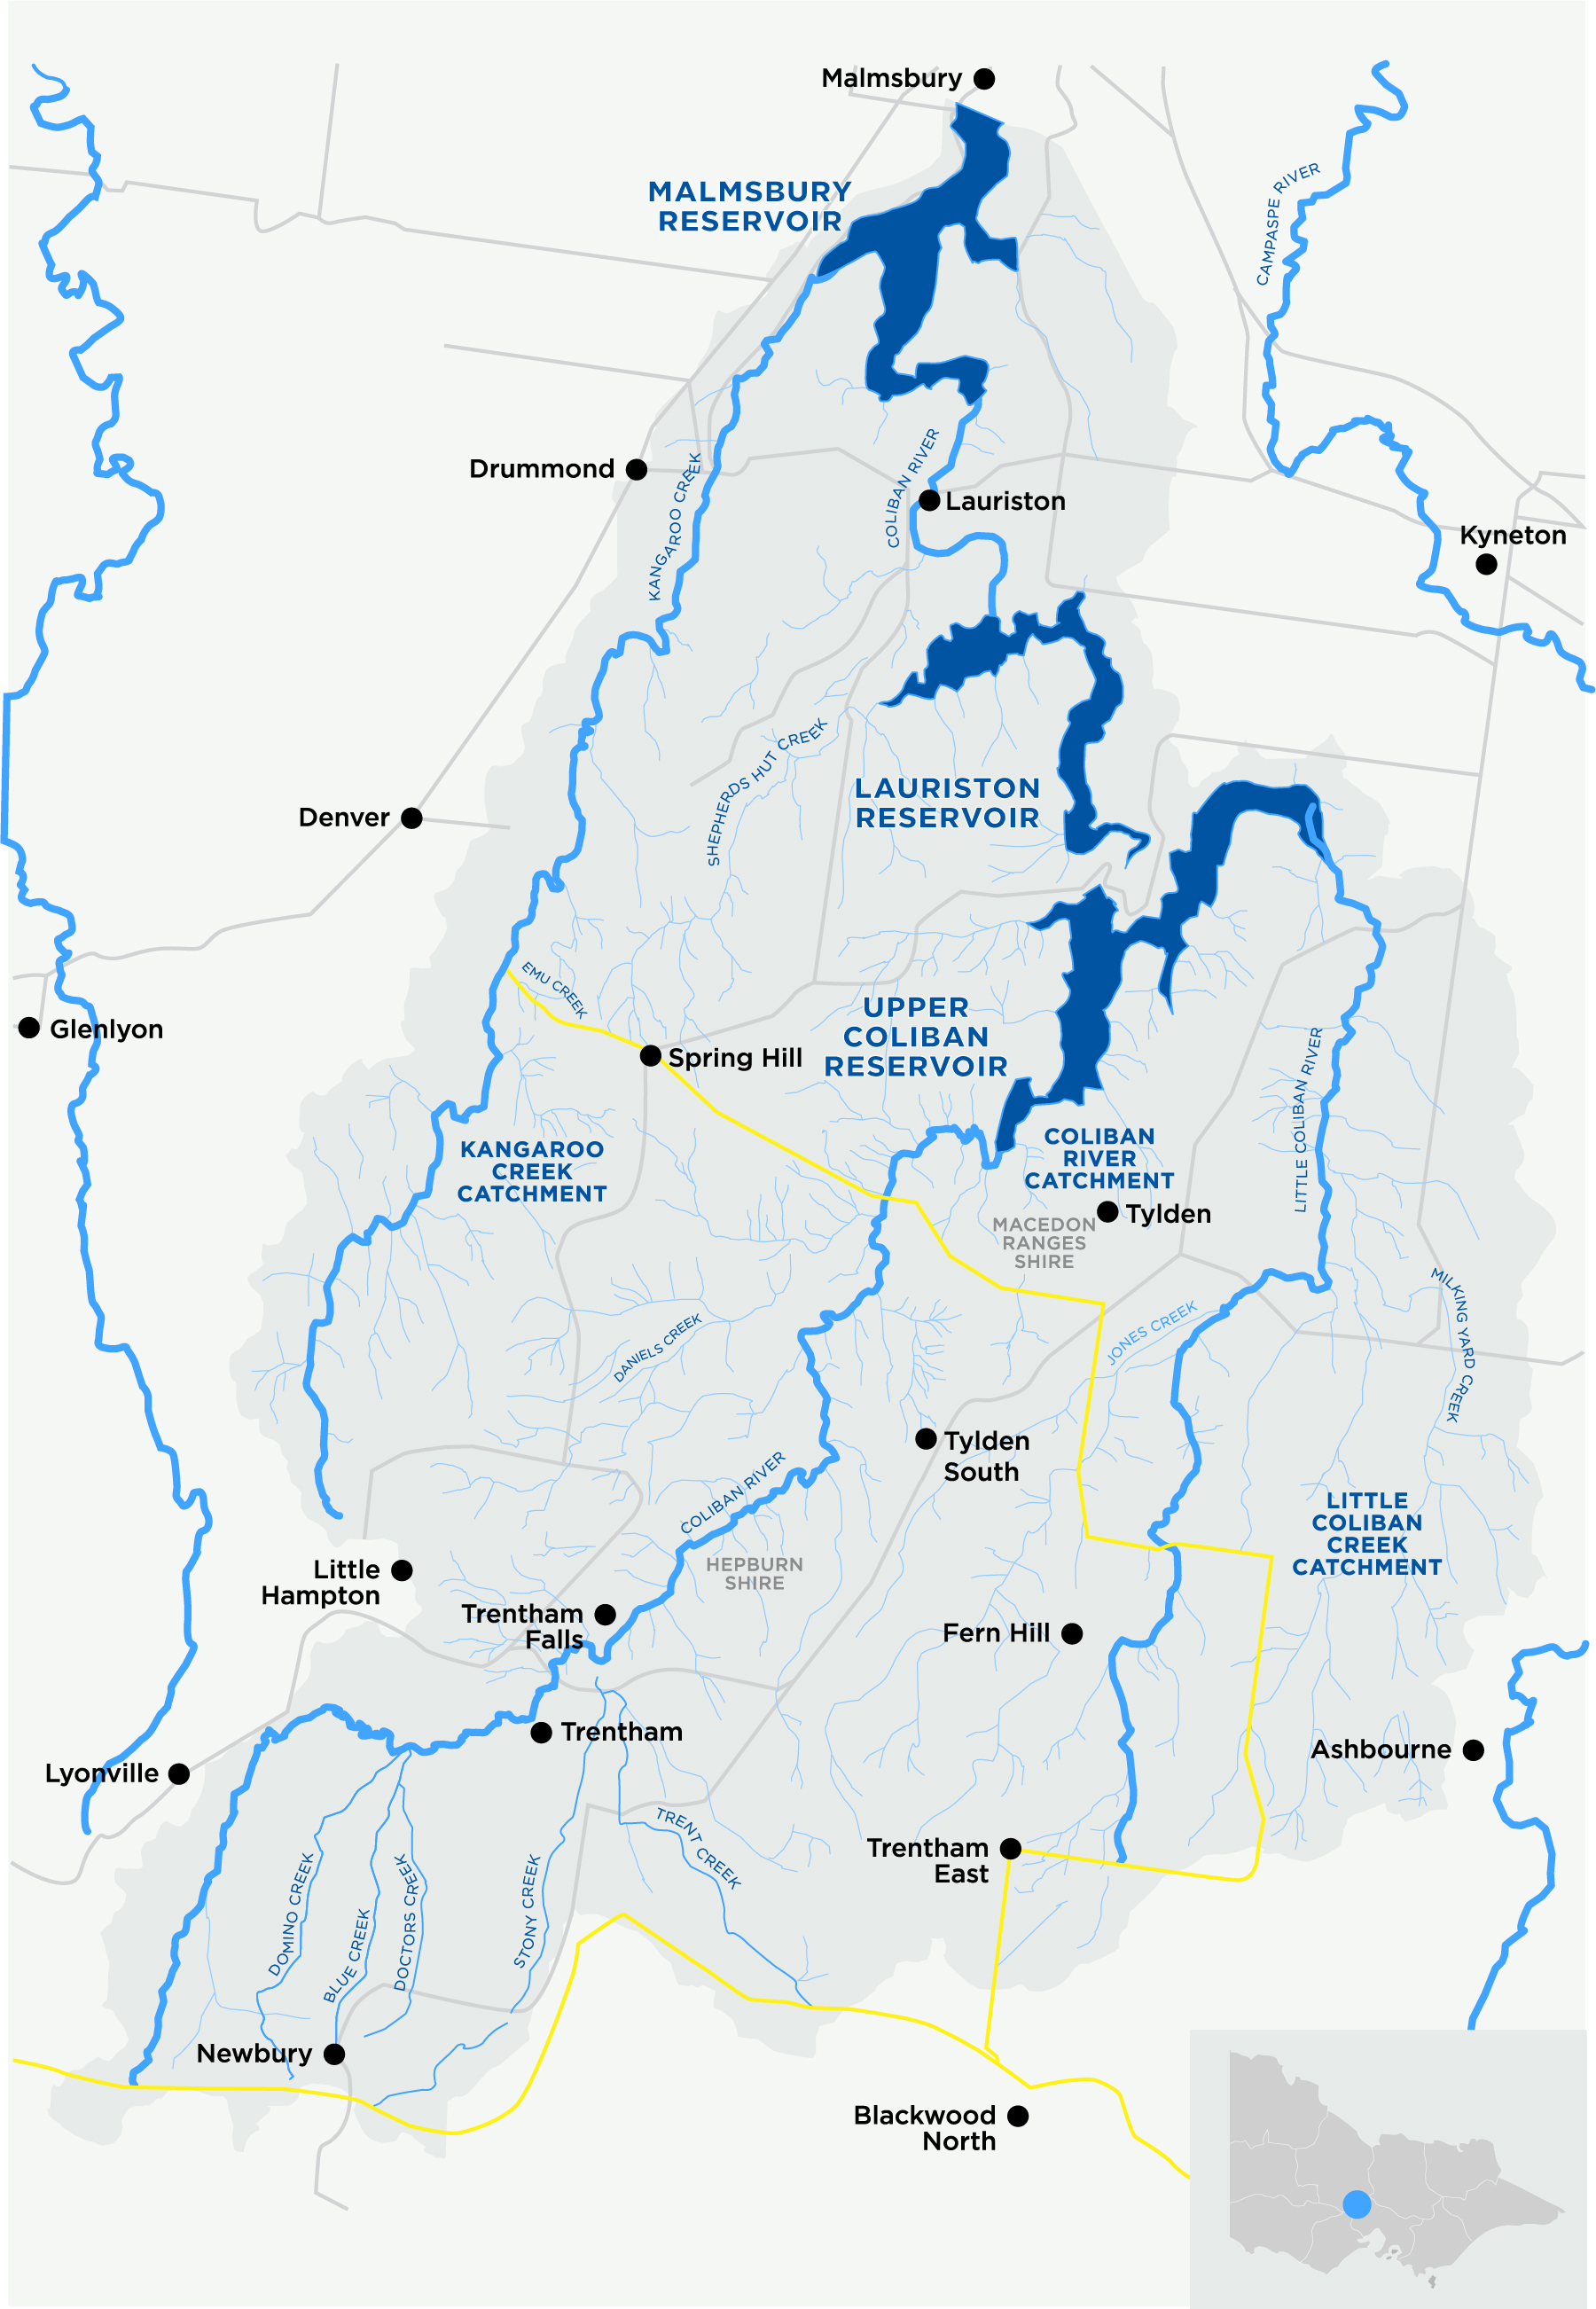 Map of the Upper Coliban Catchment area